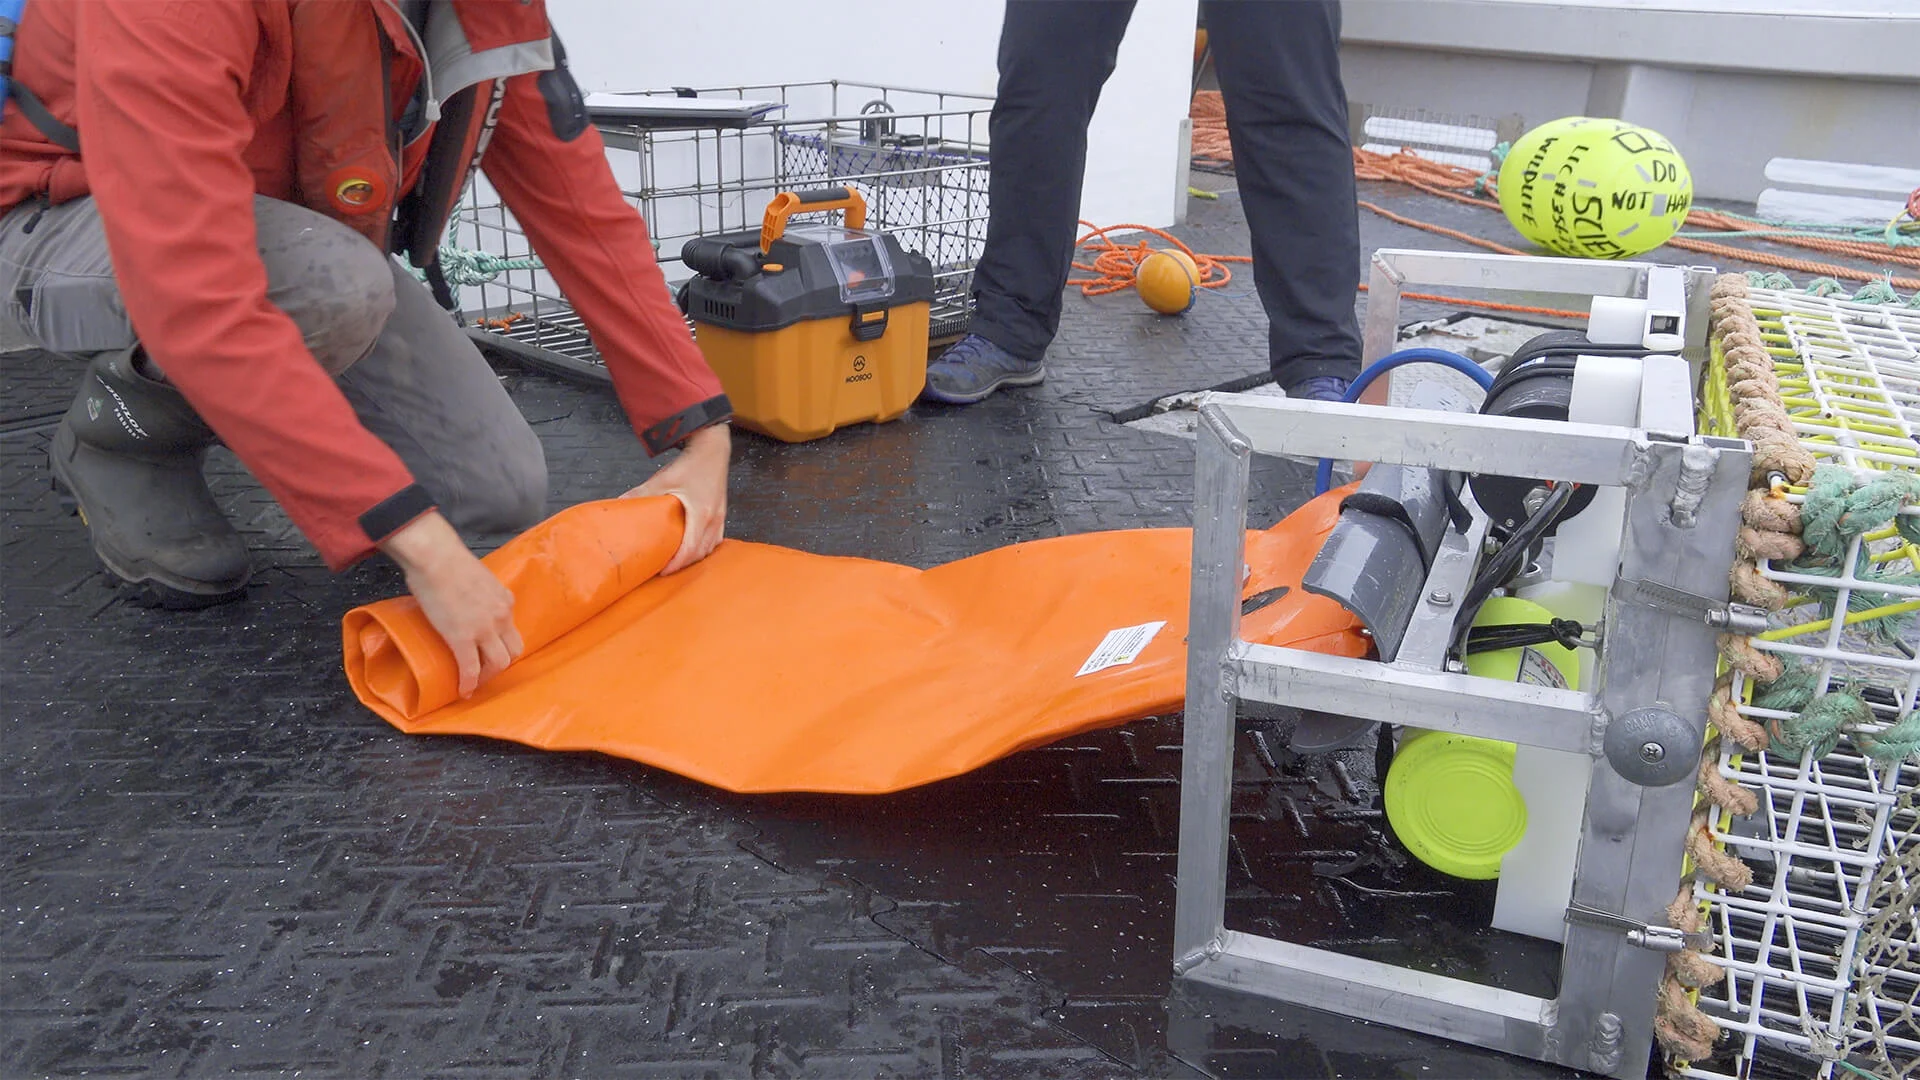 Innovative ropeless fishing gear helps prevent whale entanglements